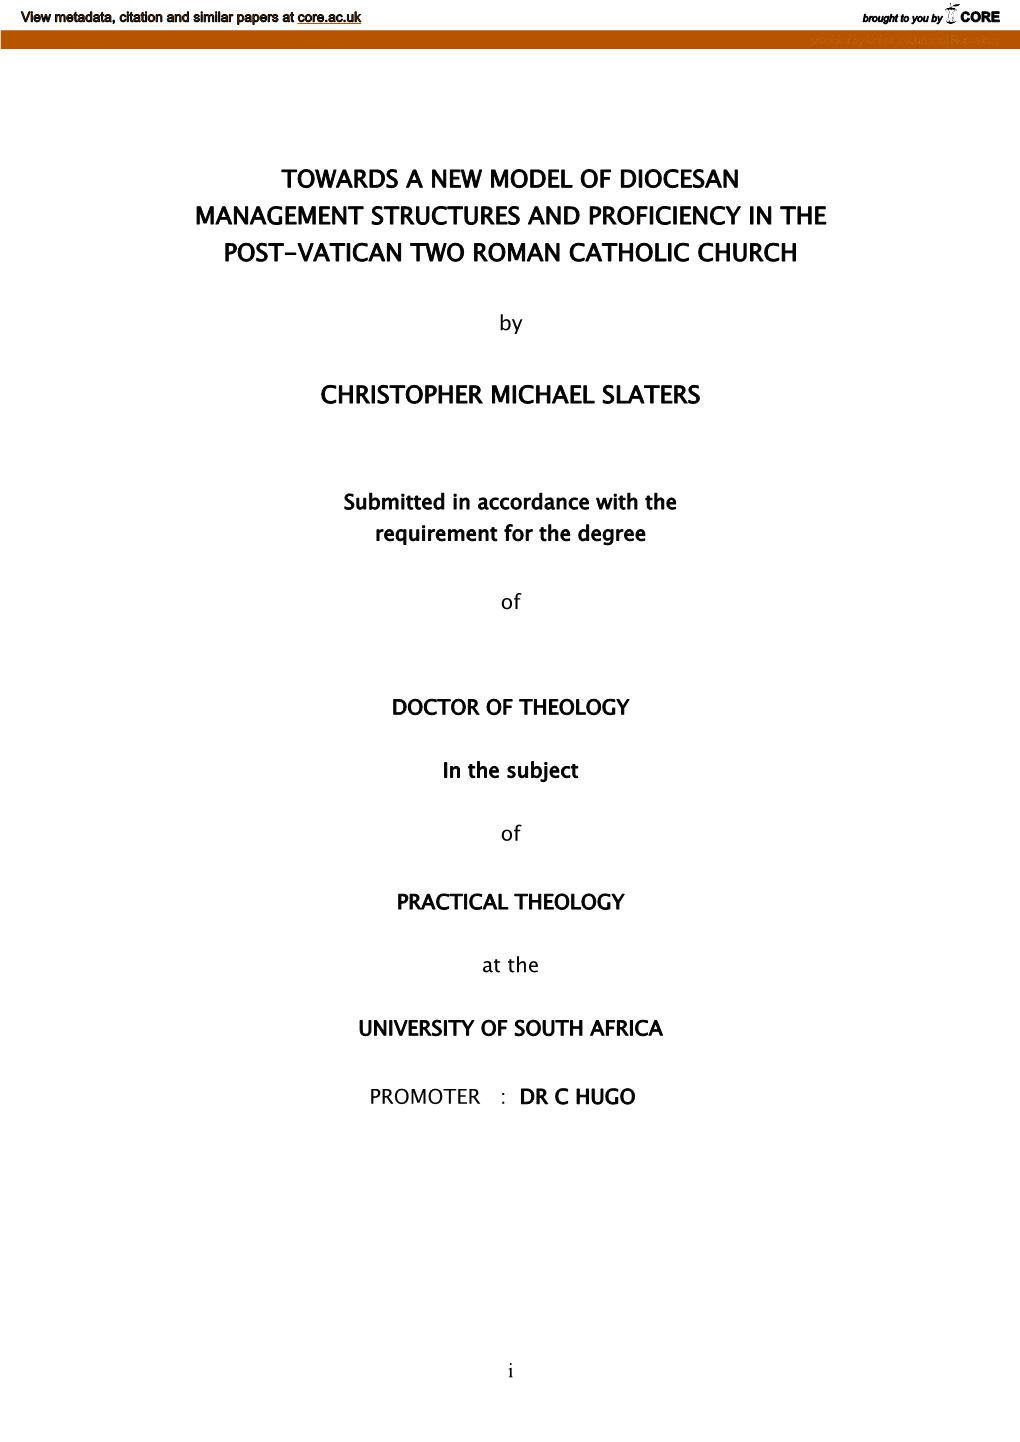 Towards a New Model of Diocesan Management Structures and Proficiency in the Post-Vatican Two Roman Catholic Church